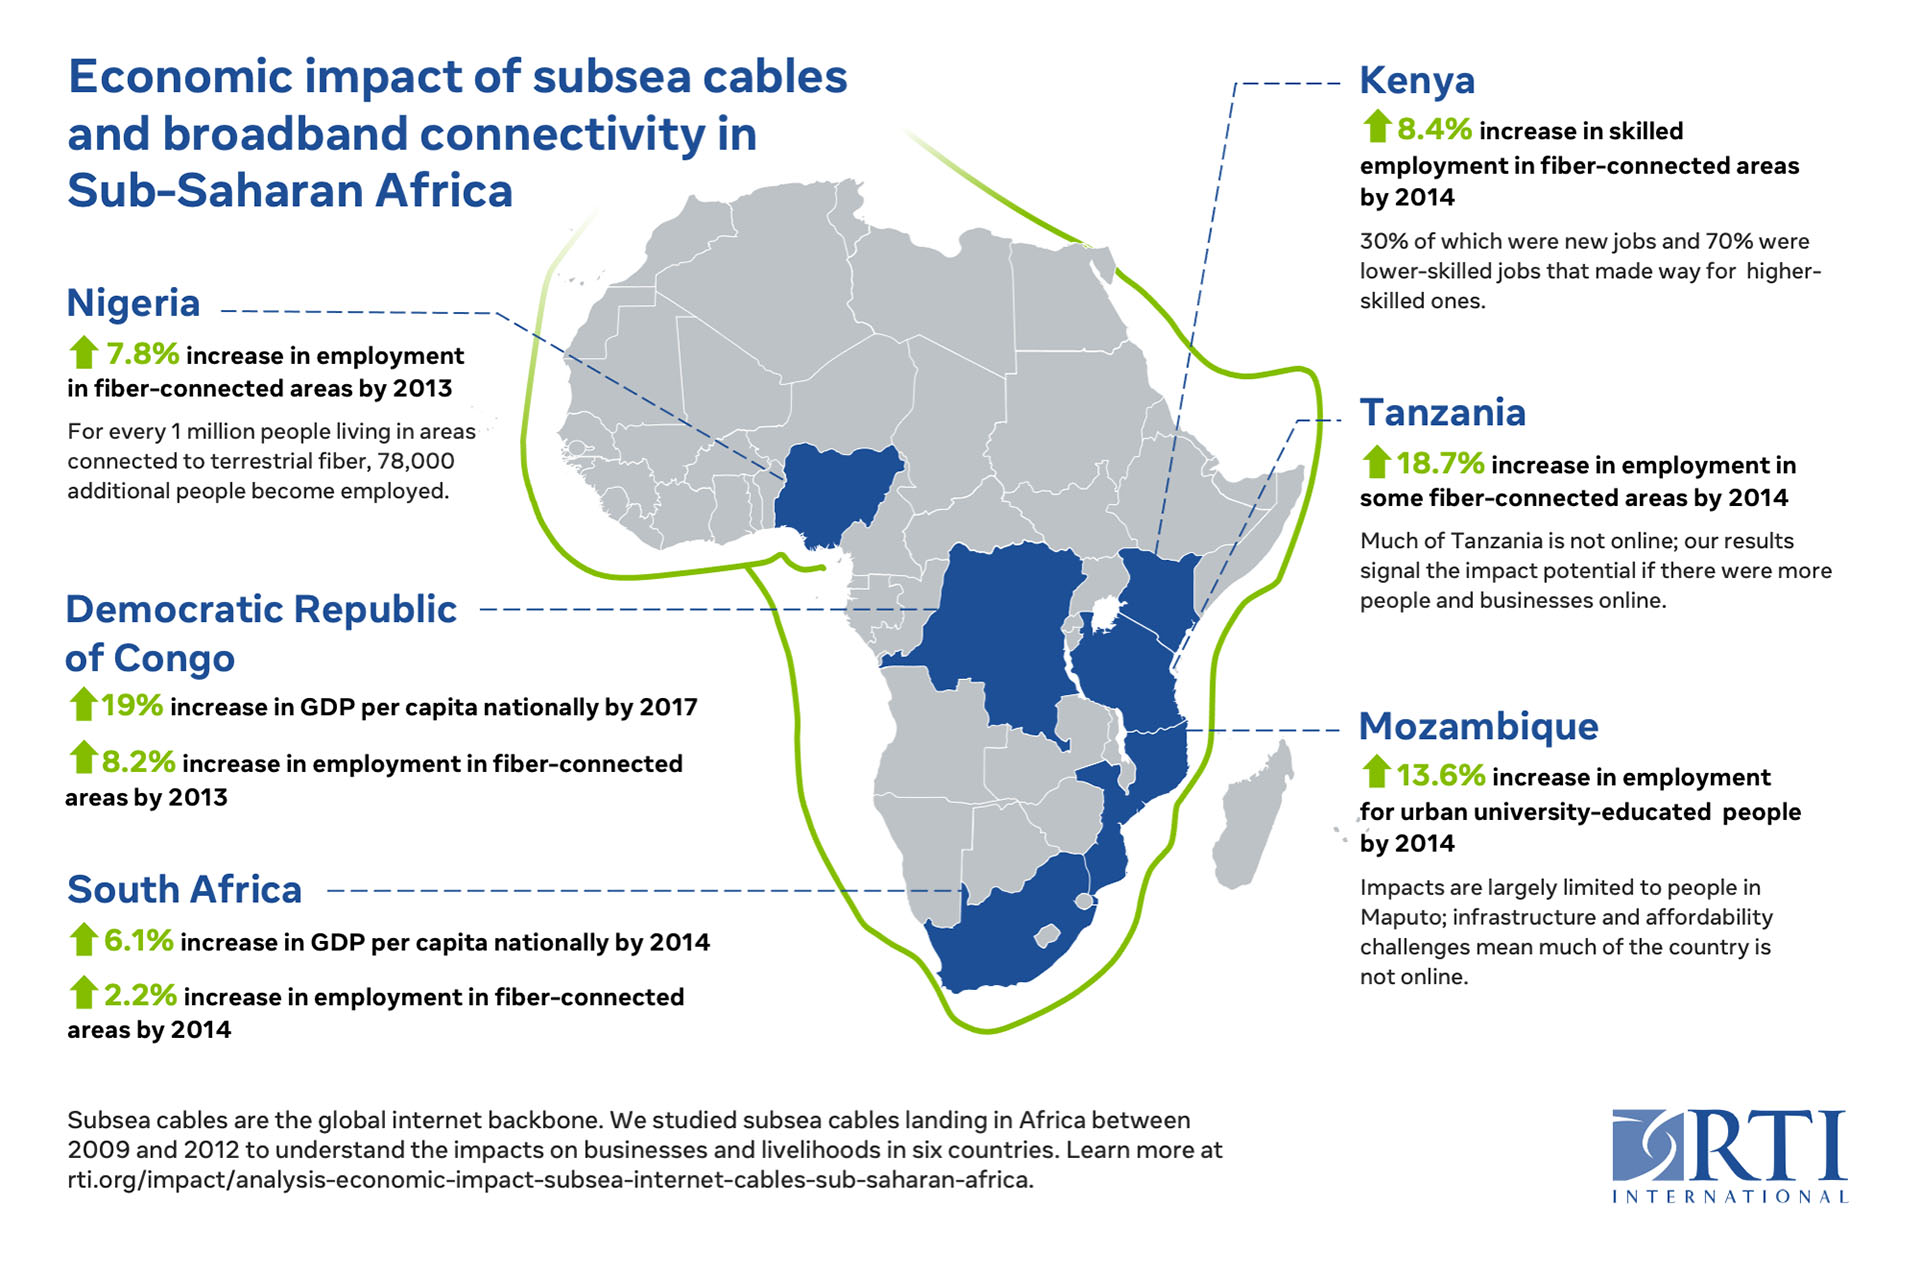 Africa-Subsea-Cables_optimistic.jpg